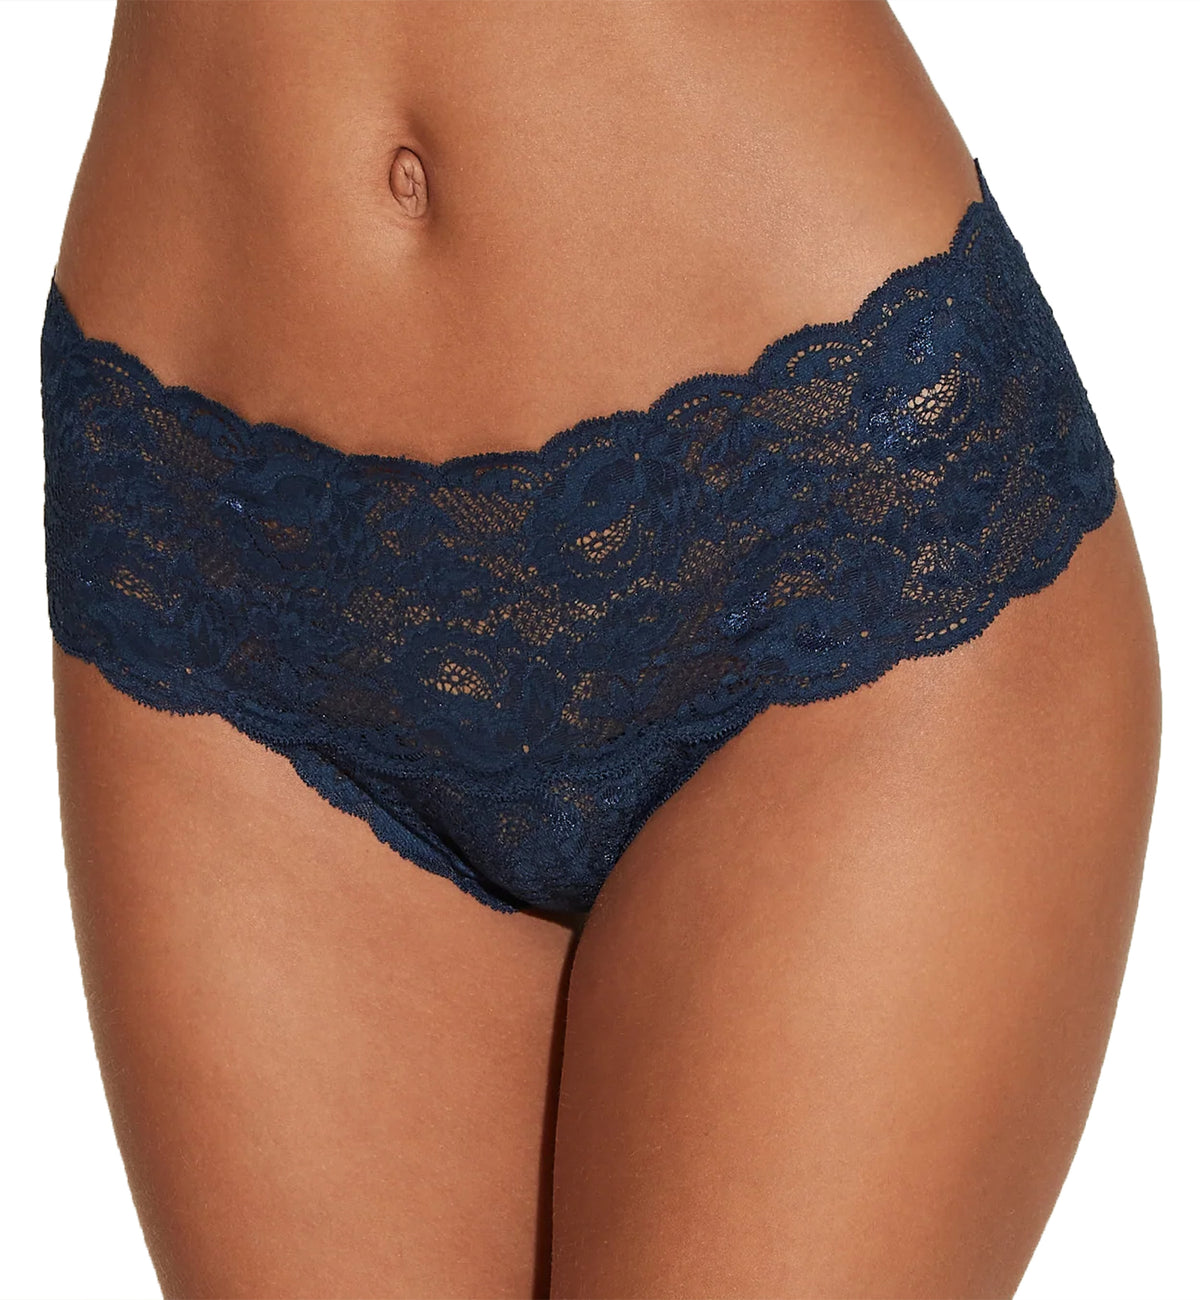 Cosabella Never Say Never Comfie Thong (NEVER0343),S/M,Navy Blue - Navy Blue,S/M